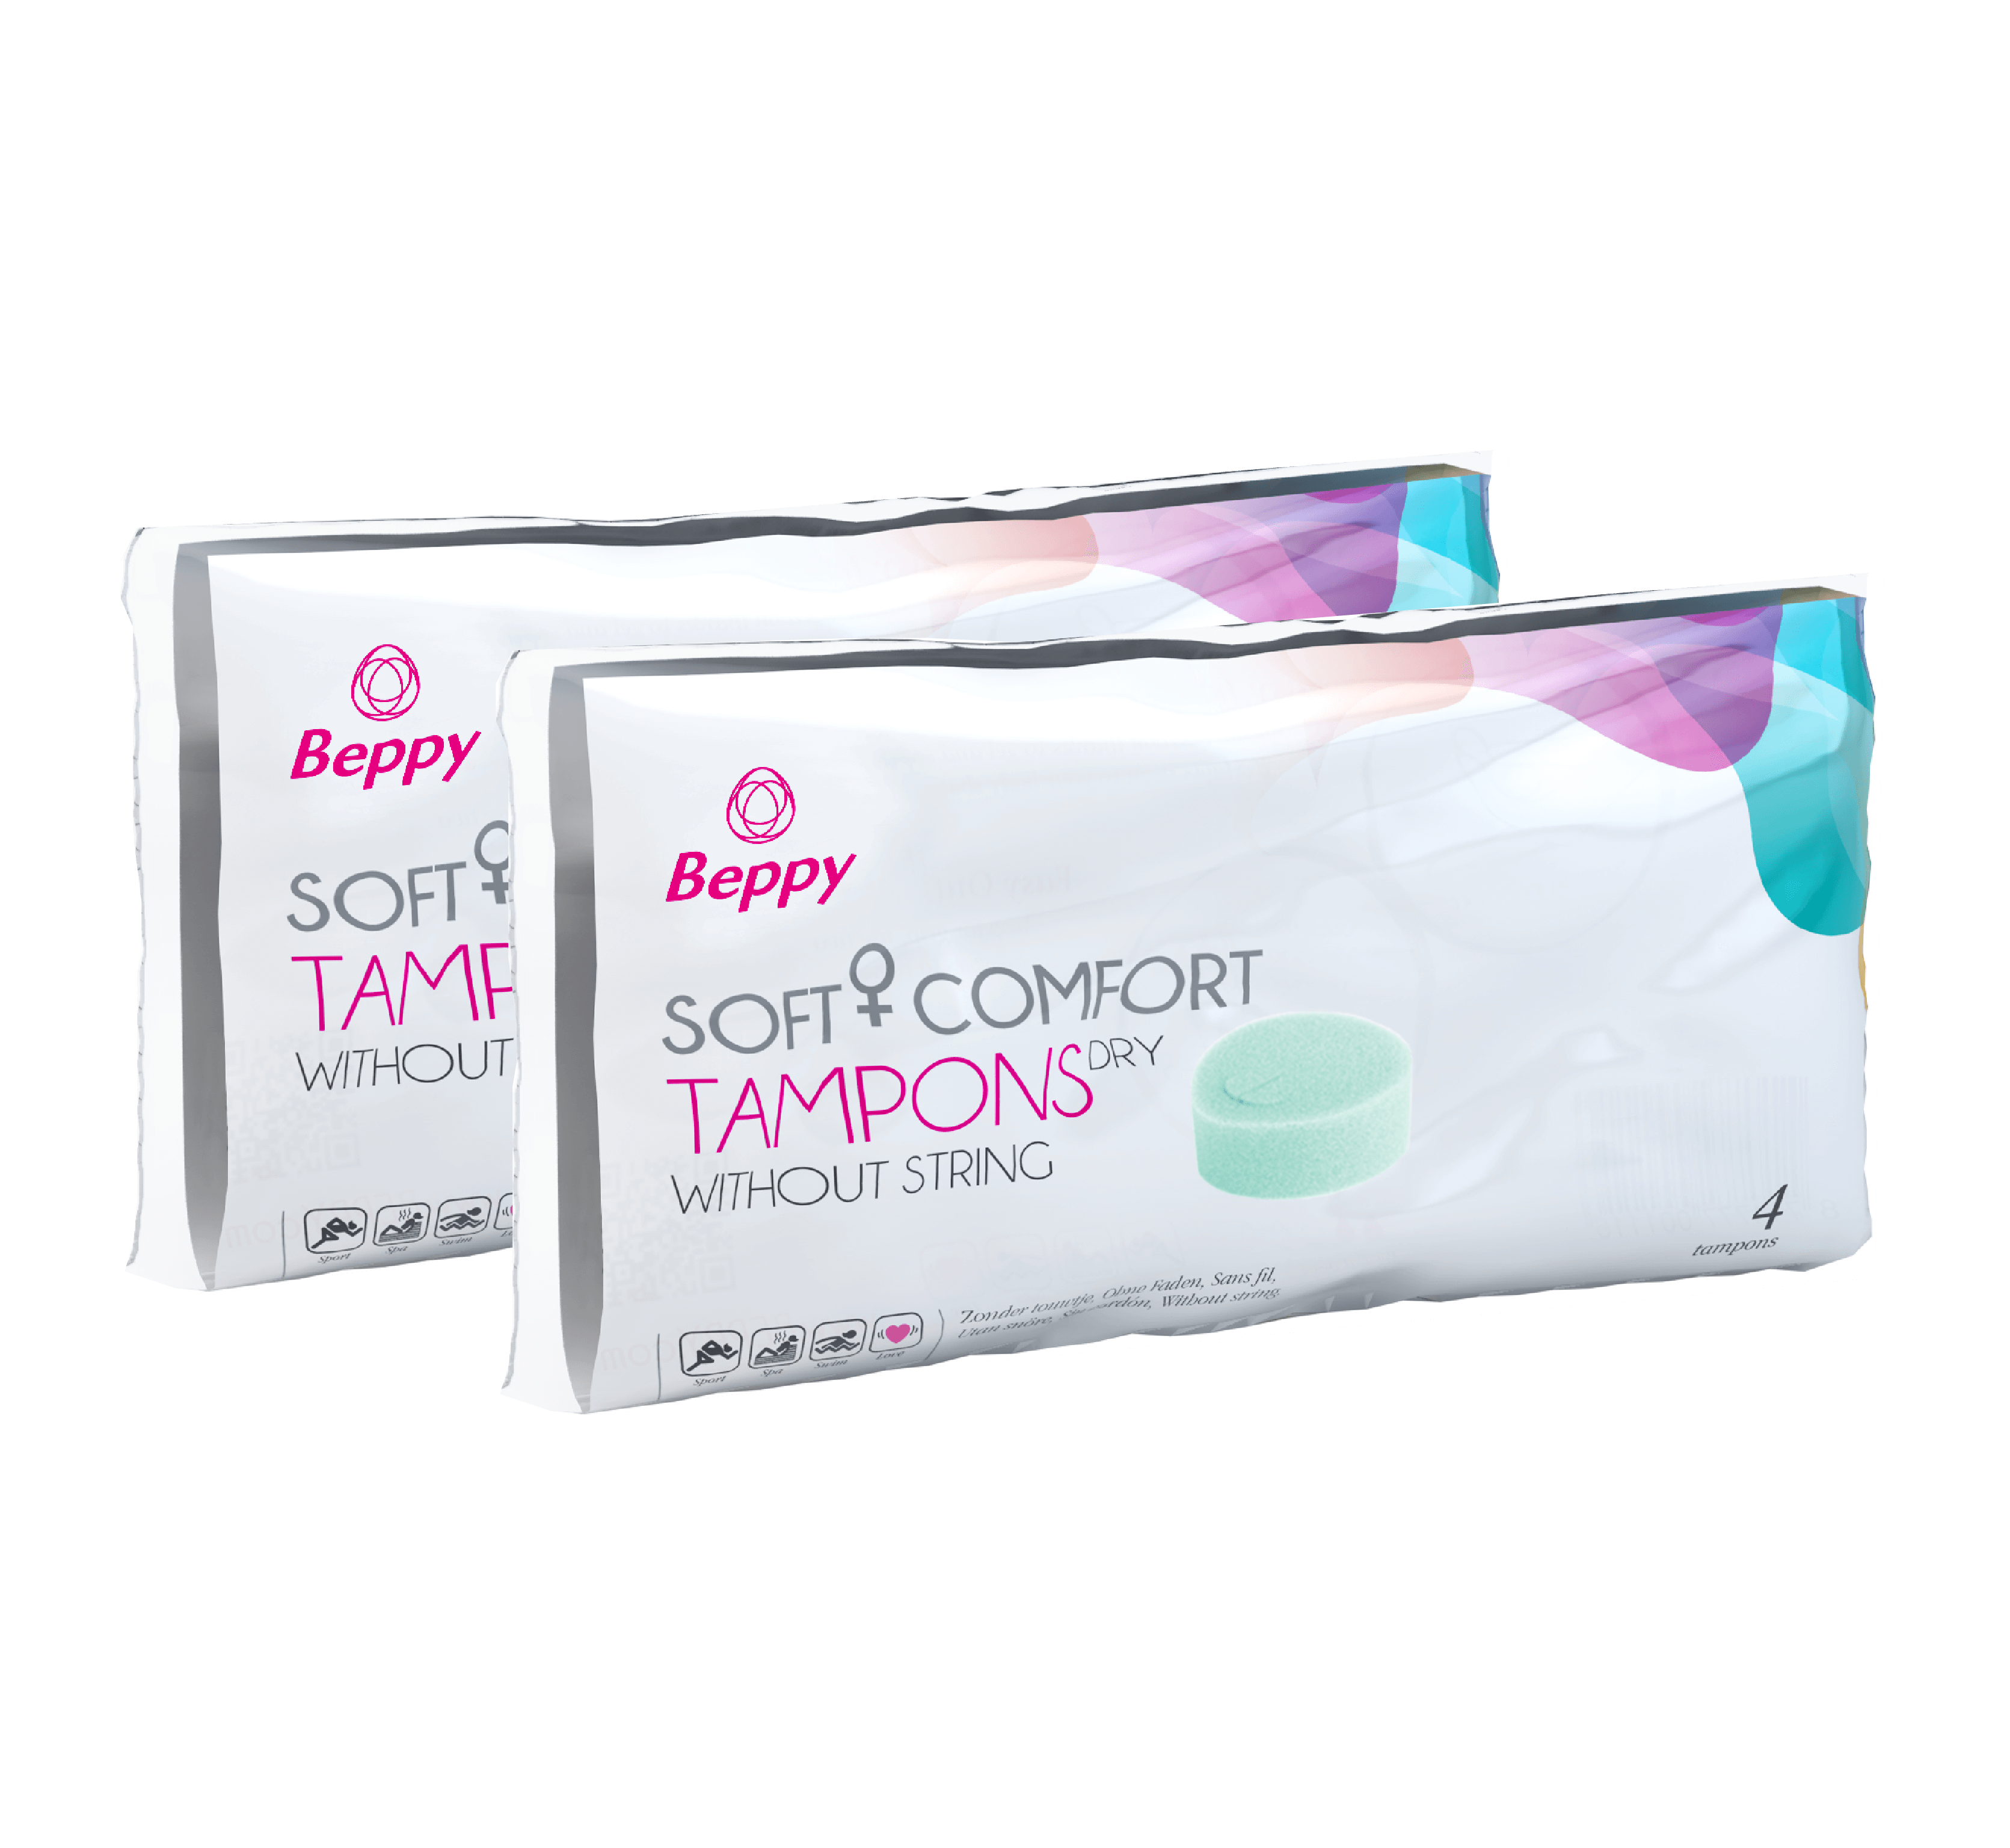 Beppy Soft Comfort Tampons - Dry Tampon without ribbon